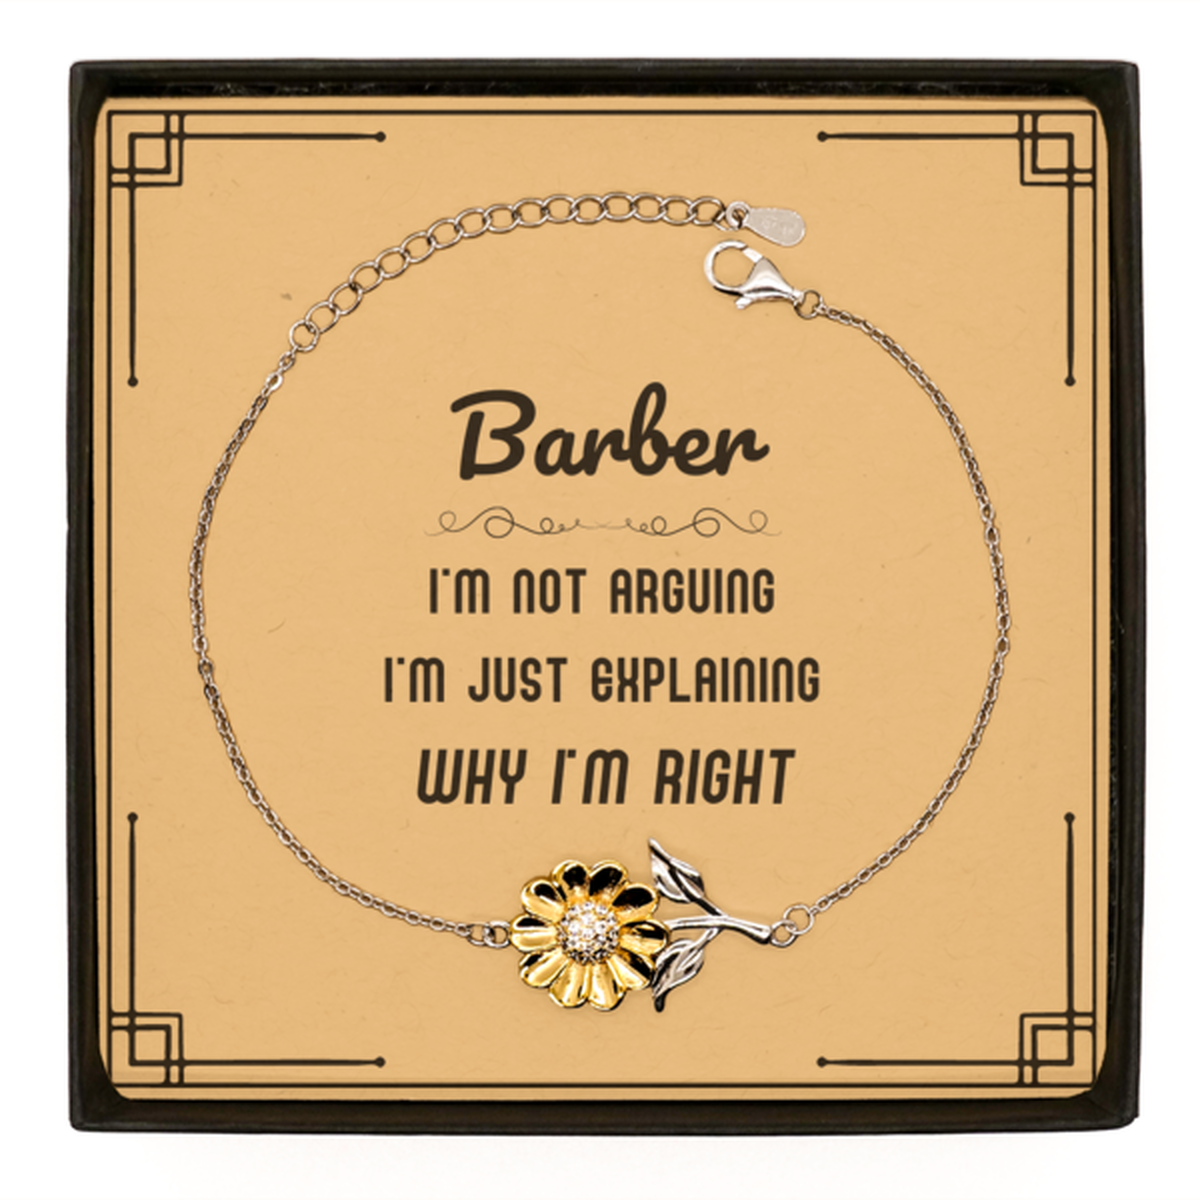 Barber I'm not Arguing. I'm Just Explaining Why I'm RIGHT Sunflower Bracelet, Funny Saying Quote Barber Gifts For Barber Message Card Graduation Birthday Christmas Gifts for Men Women Coworker